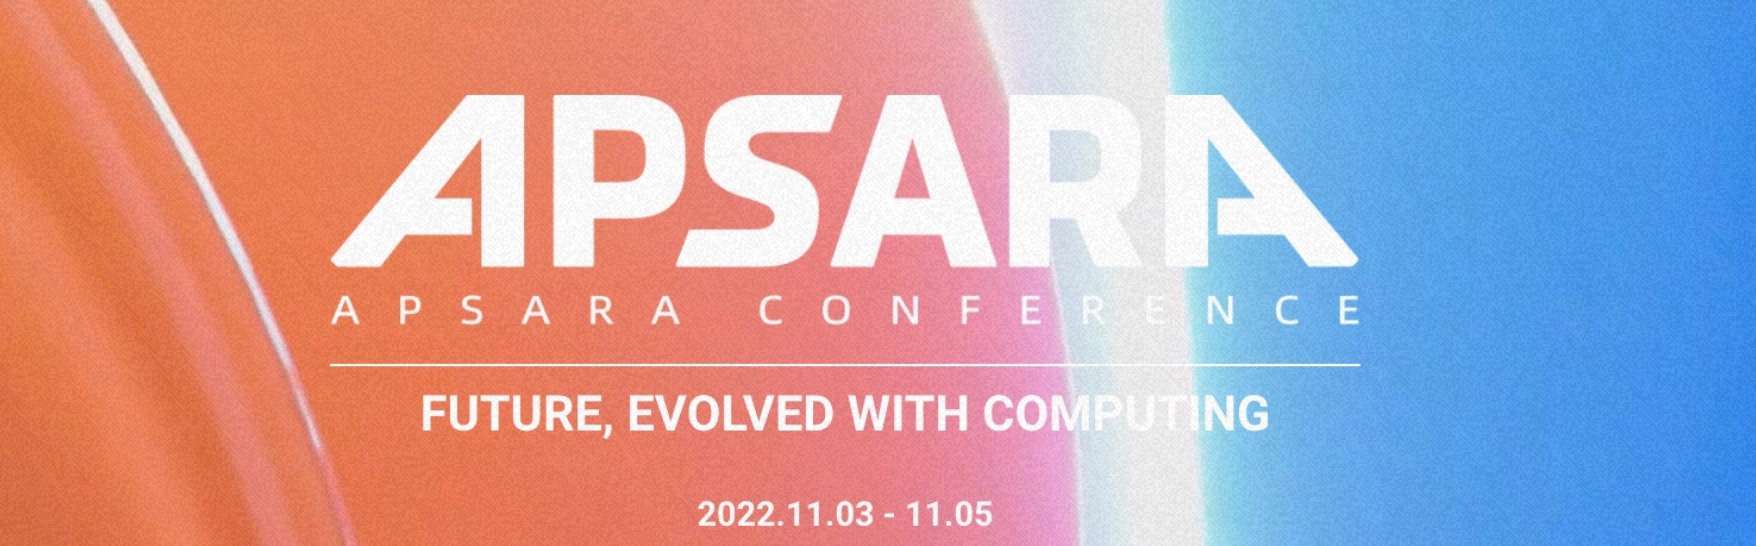 APSARA CONFERENCE 2022!